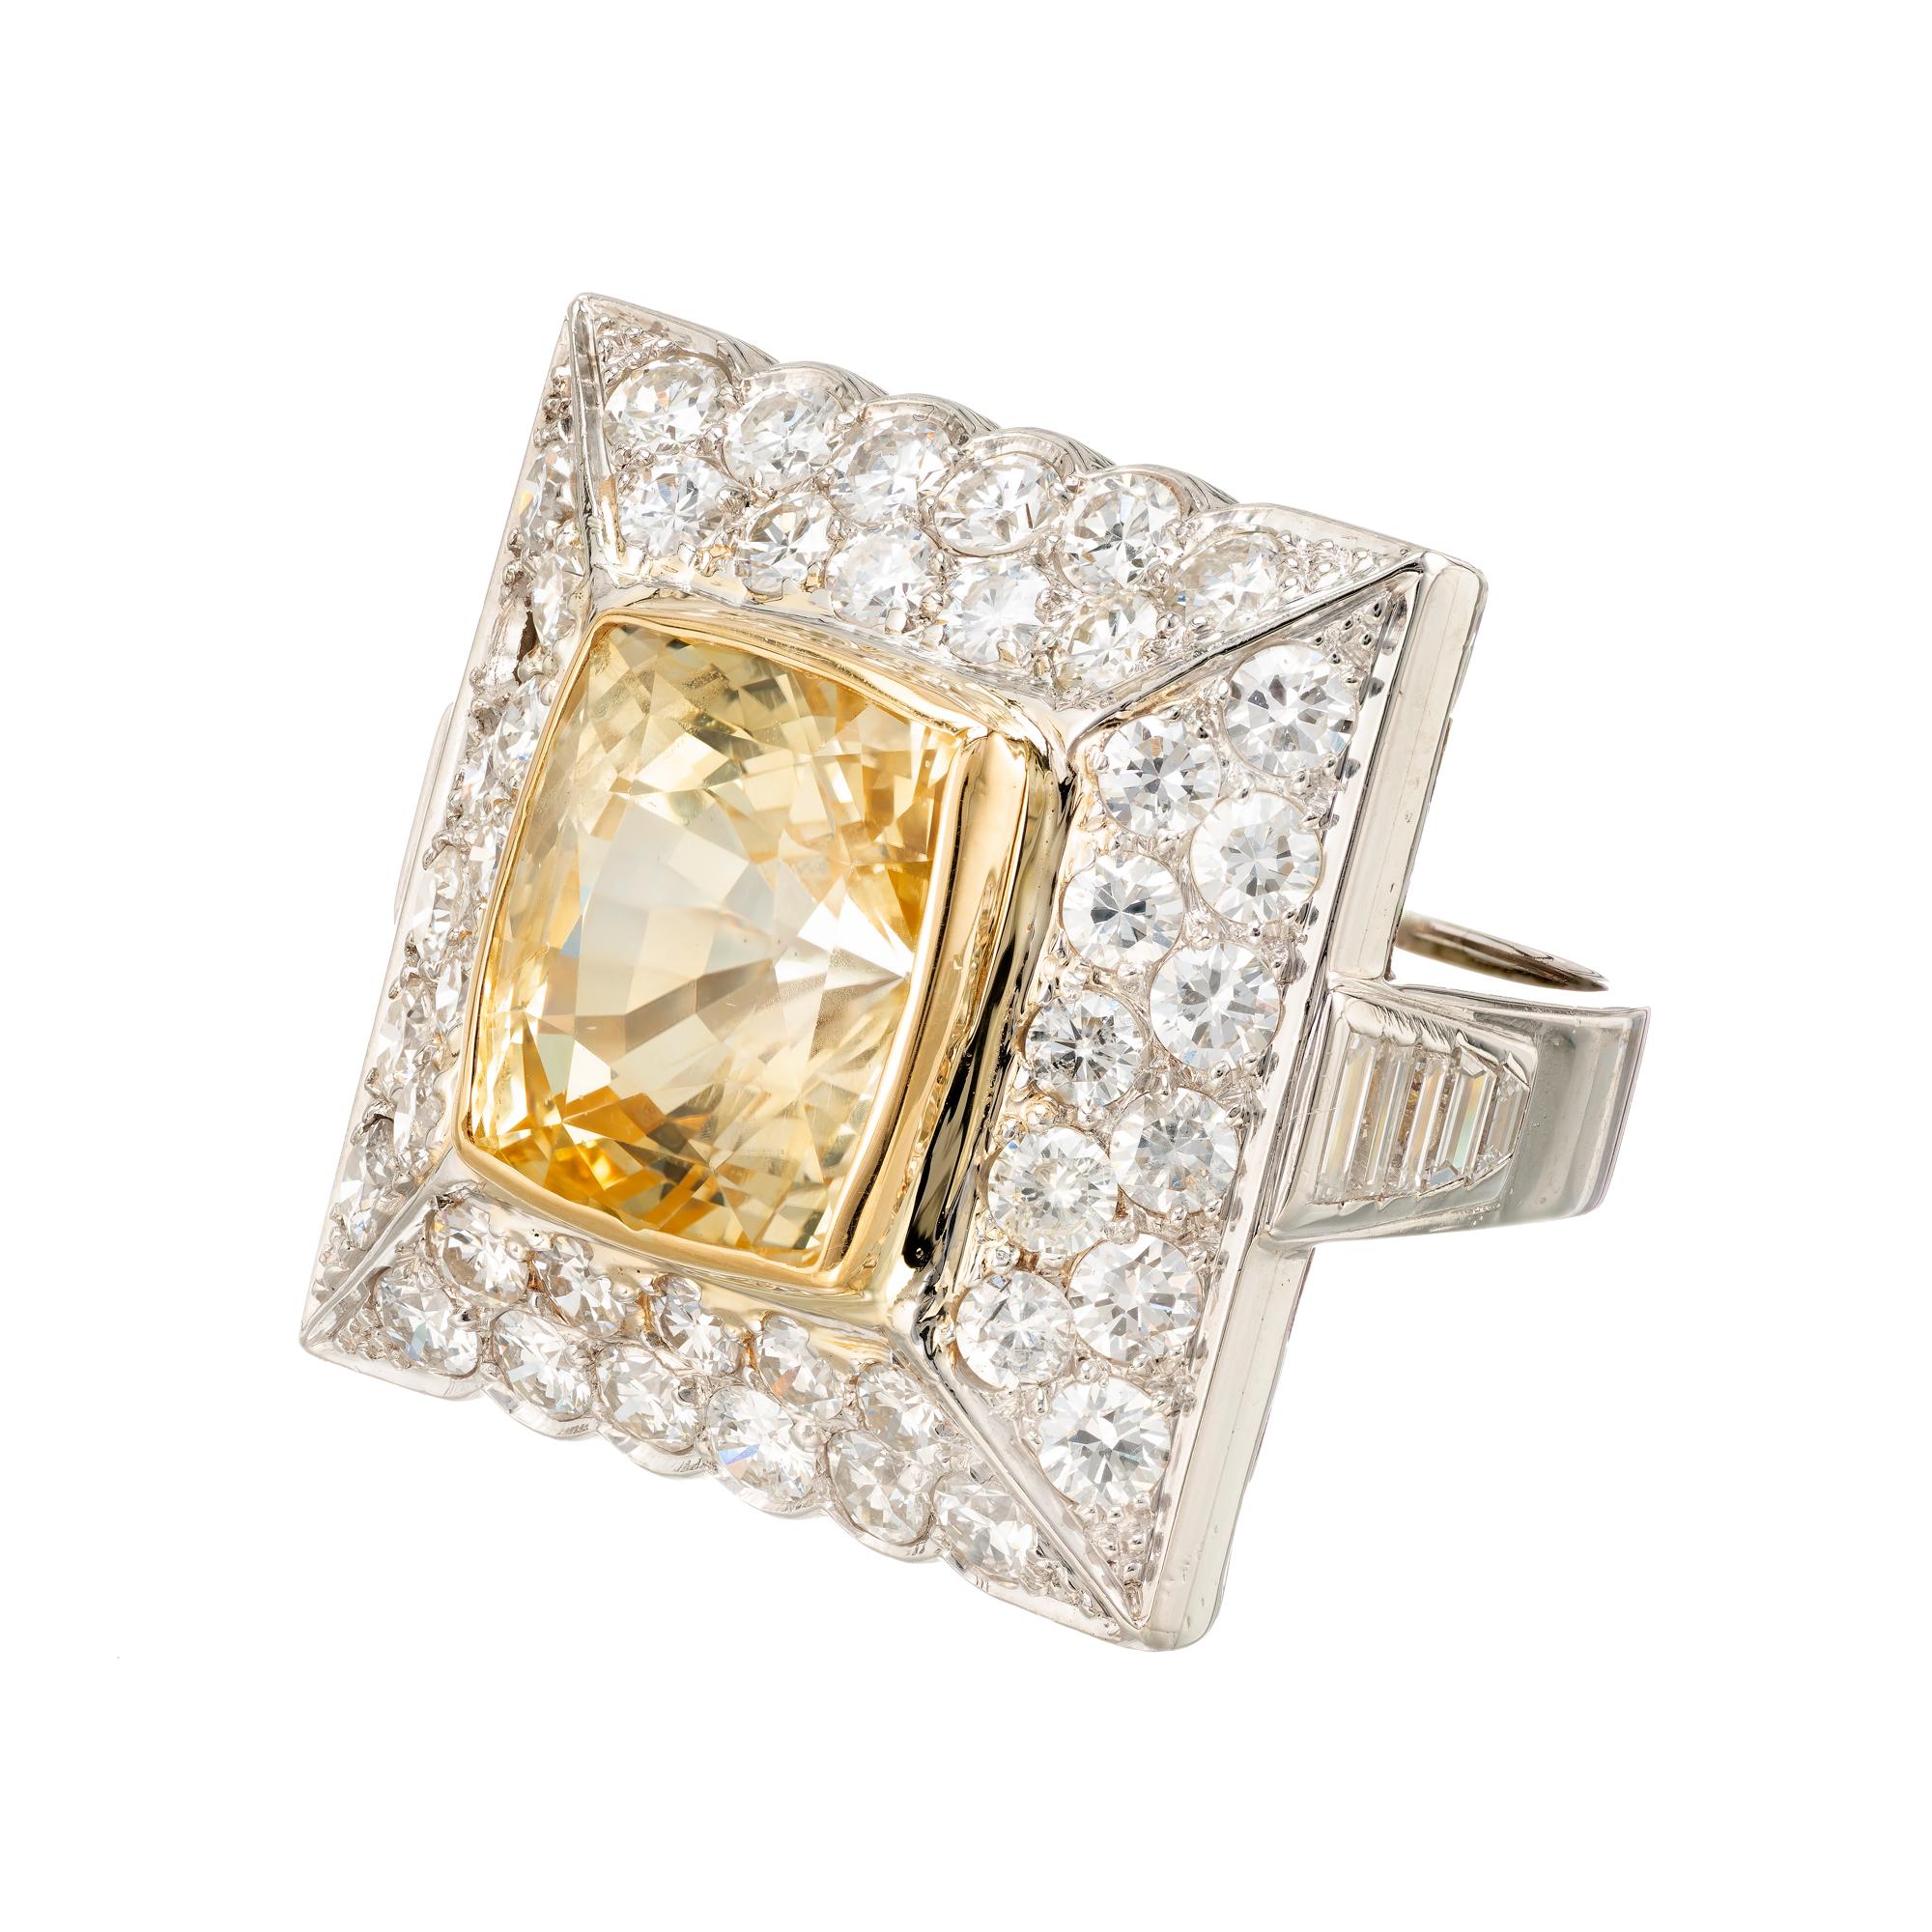 1950’s Yellow sapphire and diamond cocktail ring. Set in a platinum square top with a GIA certified natural no heat yellow center sapphire with Pavé set diamonds. 

1 cushion yellow Sapphire, approx. total weight 13.81cts, no heat, GIA certificate